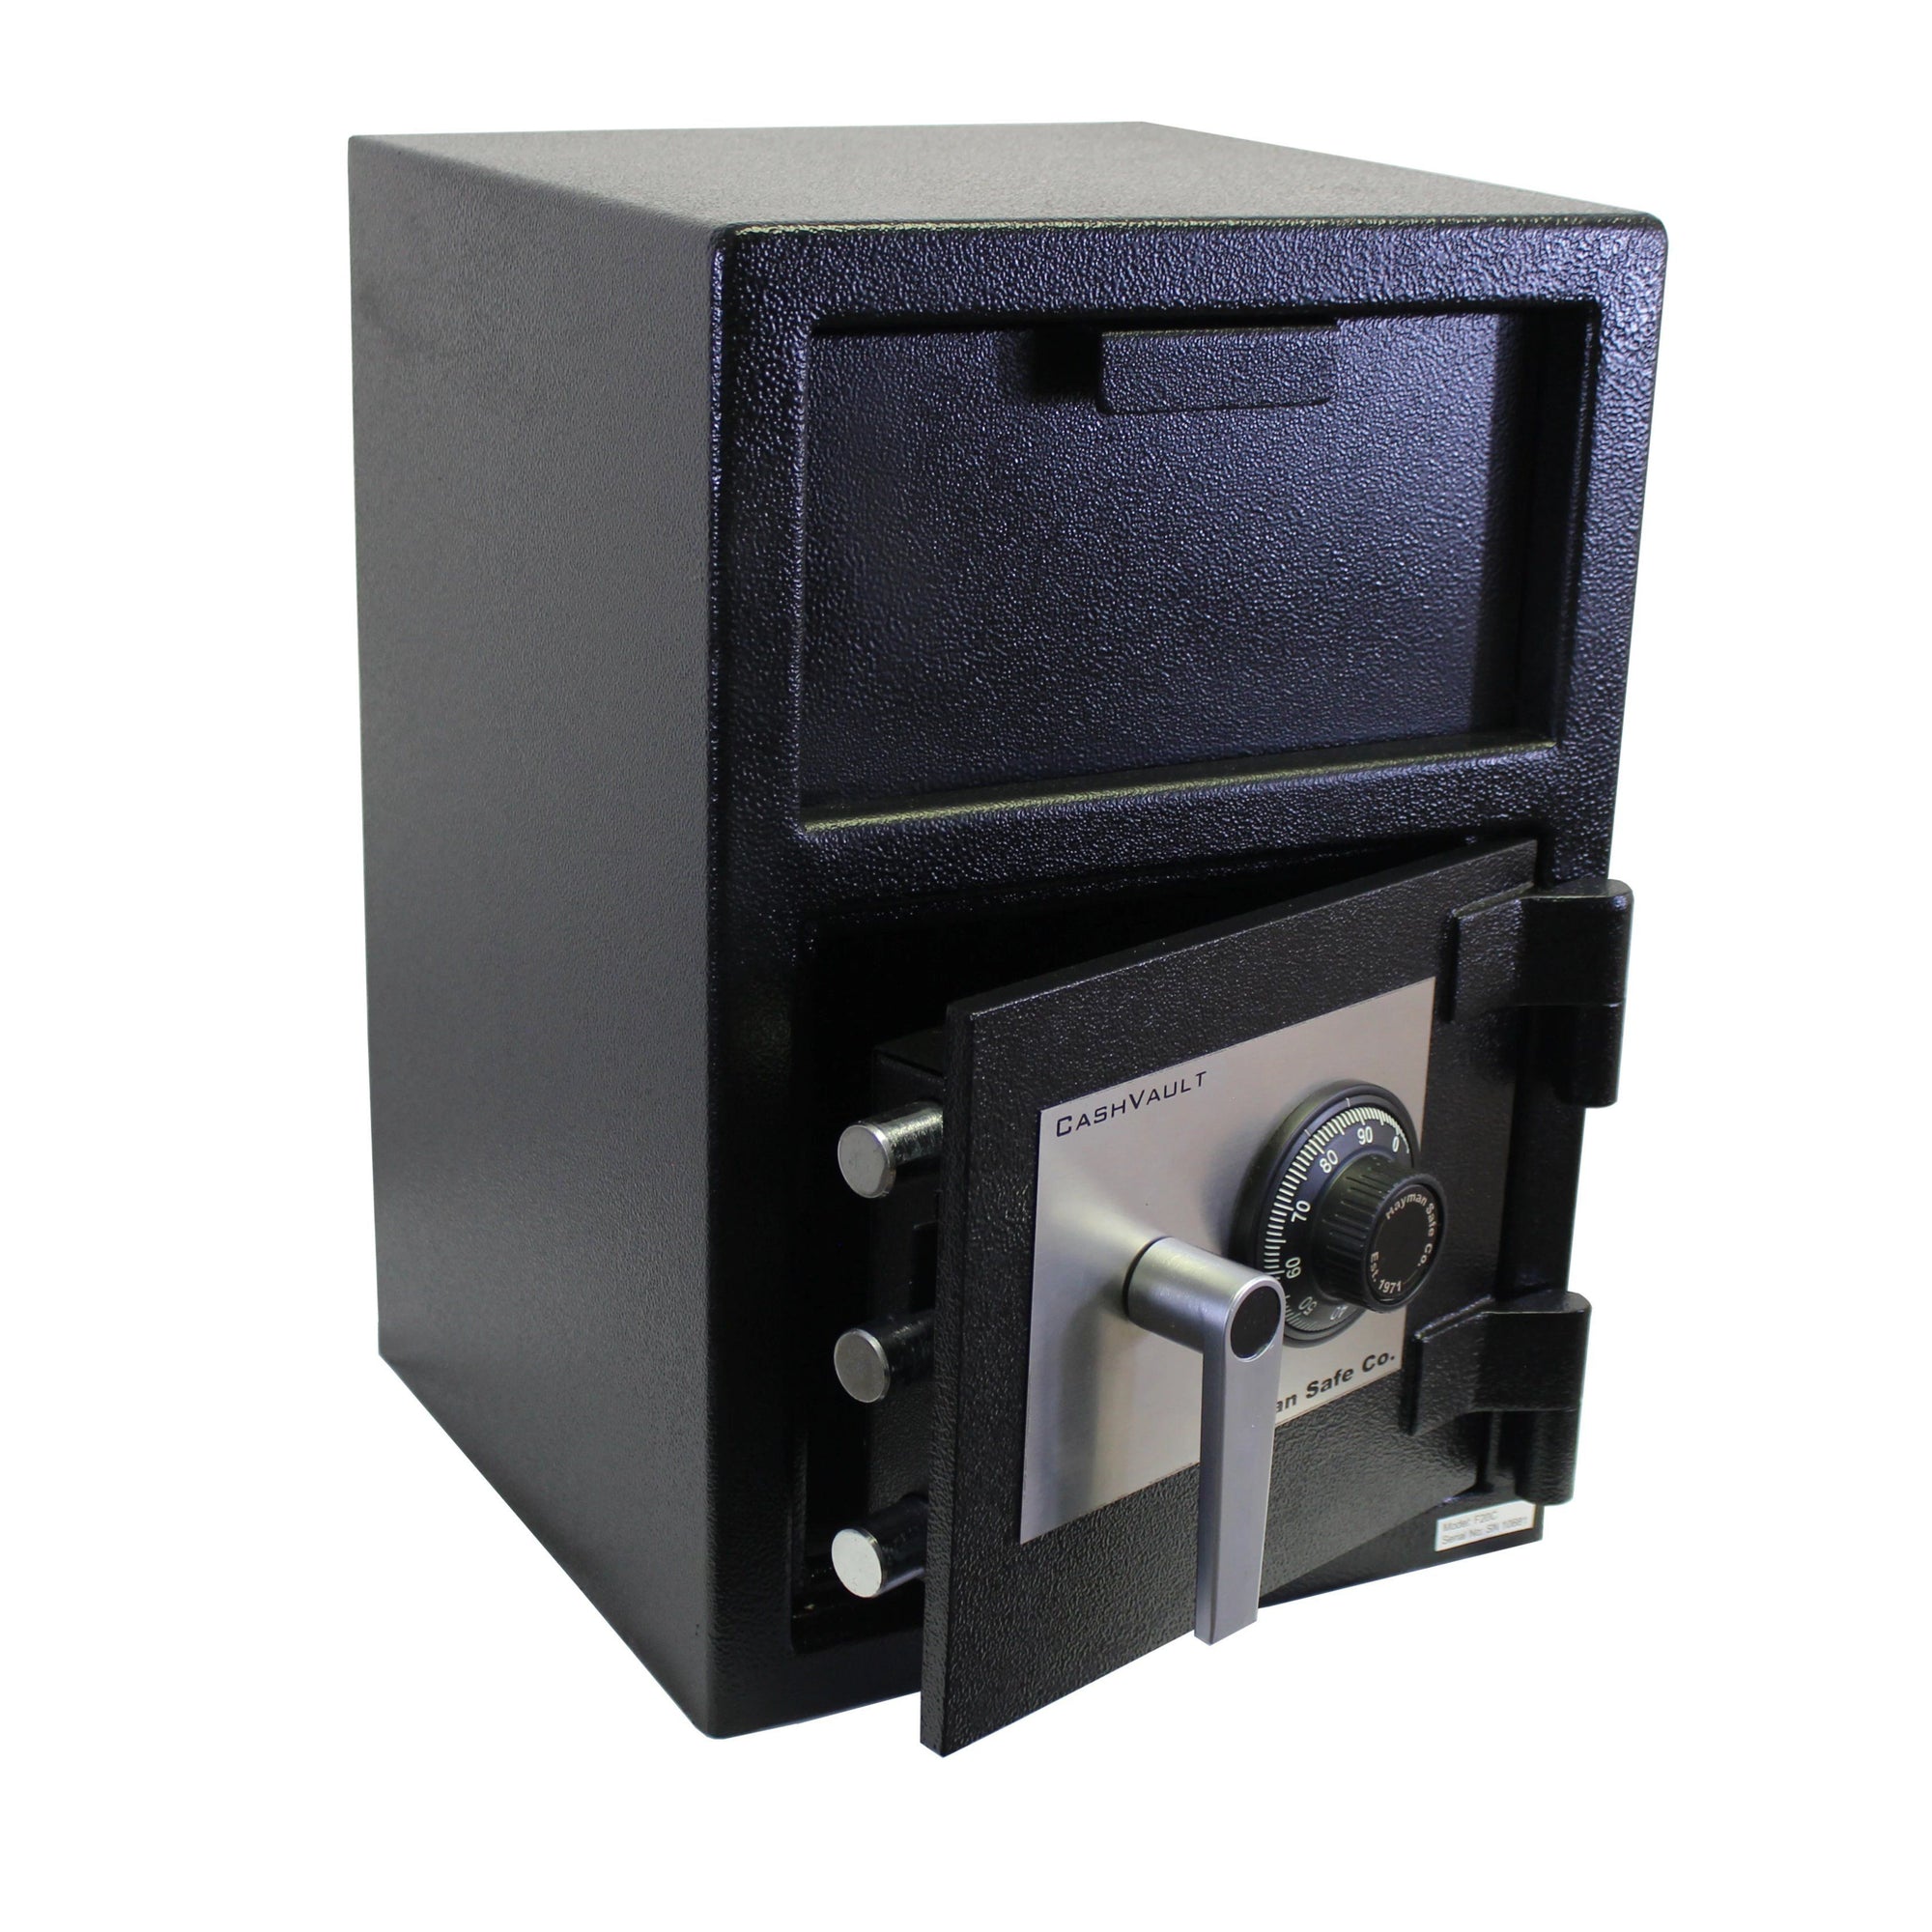 A black Hayman Safe CV-F20-C Front Loading Depository Safe with a combination dial and a metallic handle, labeled "cashvault" on an isolated white background.